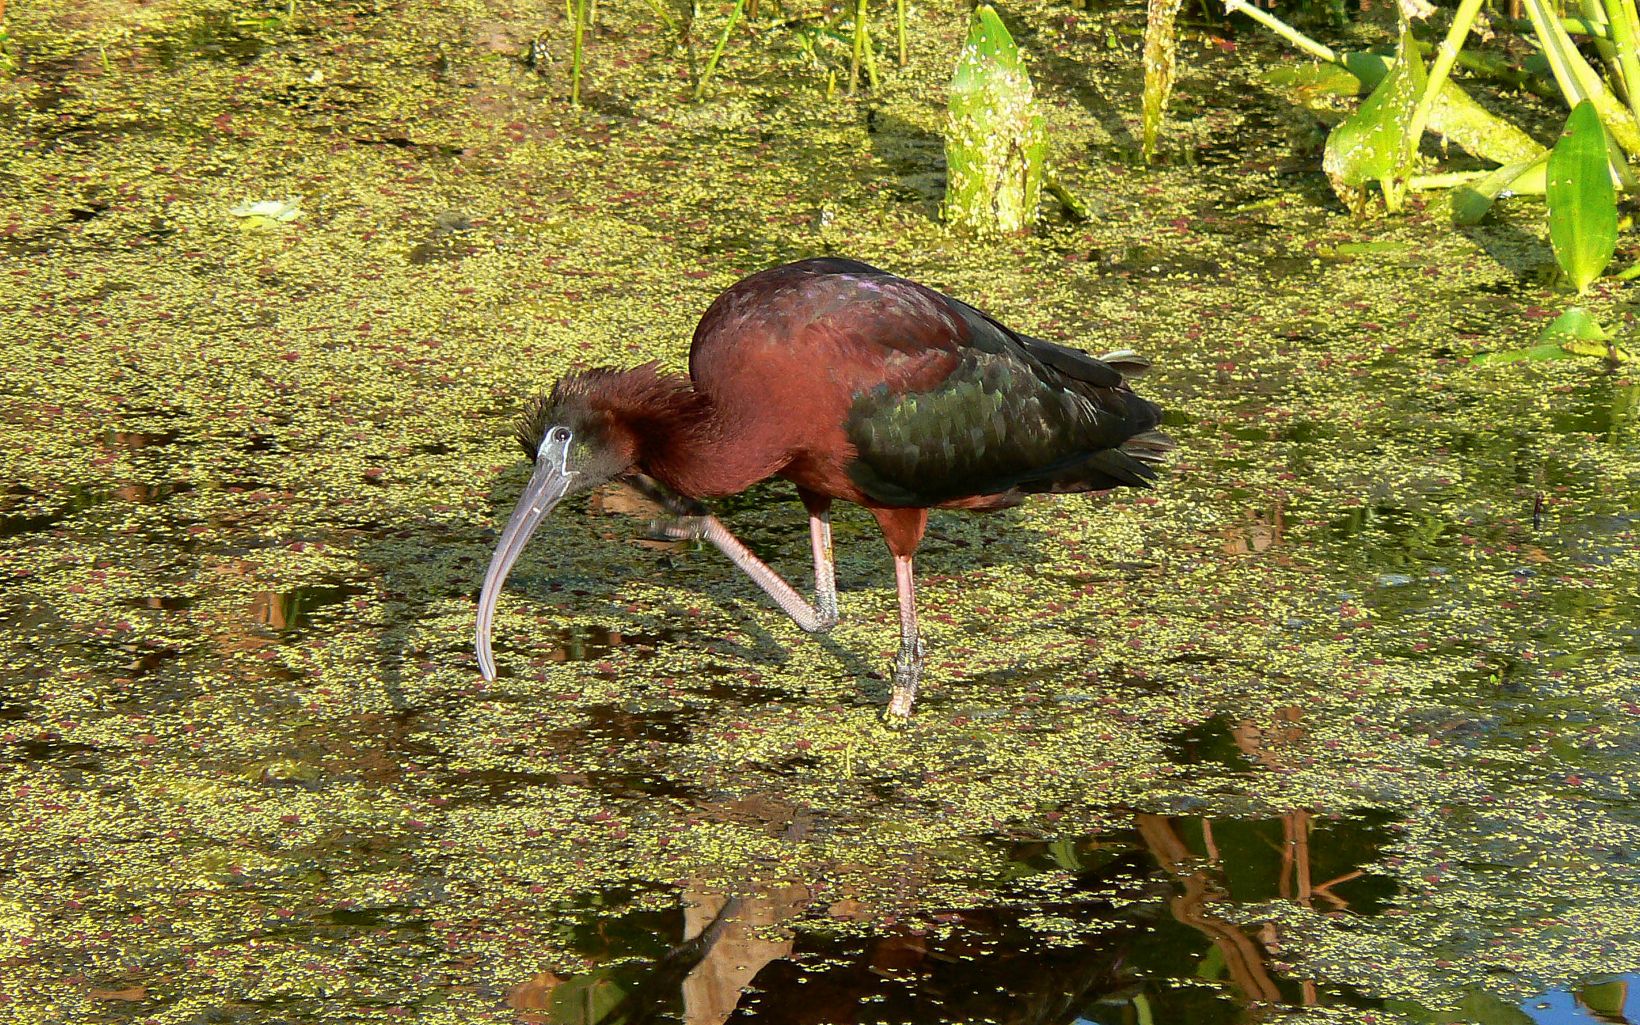 A long legged bird with a dark red breast and neck and black wings and a long, thin beak forages for food in a shallow pond.